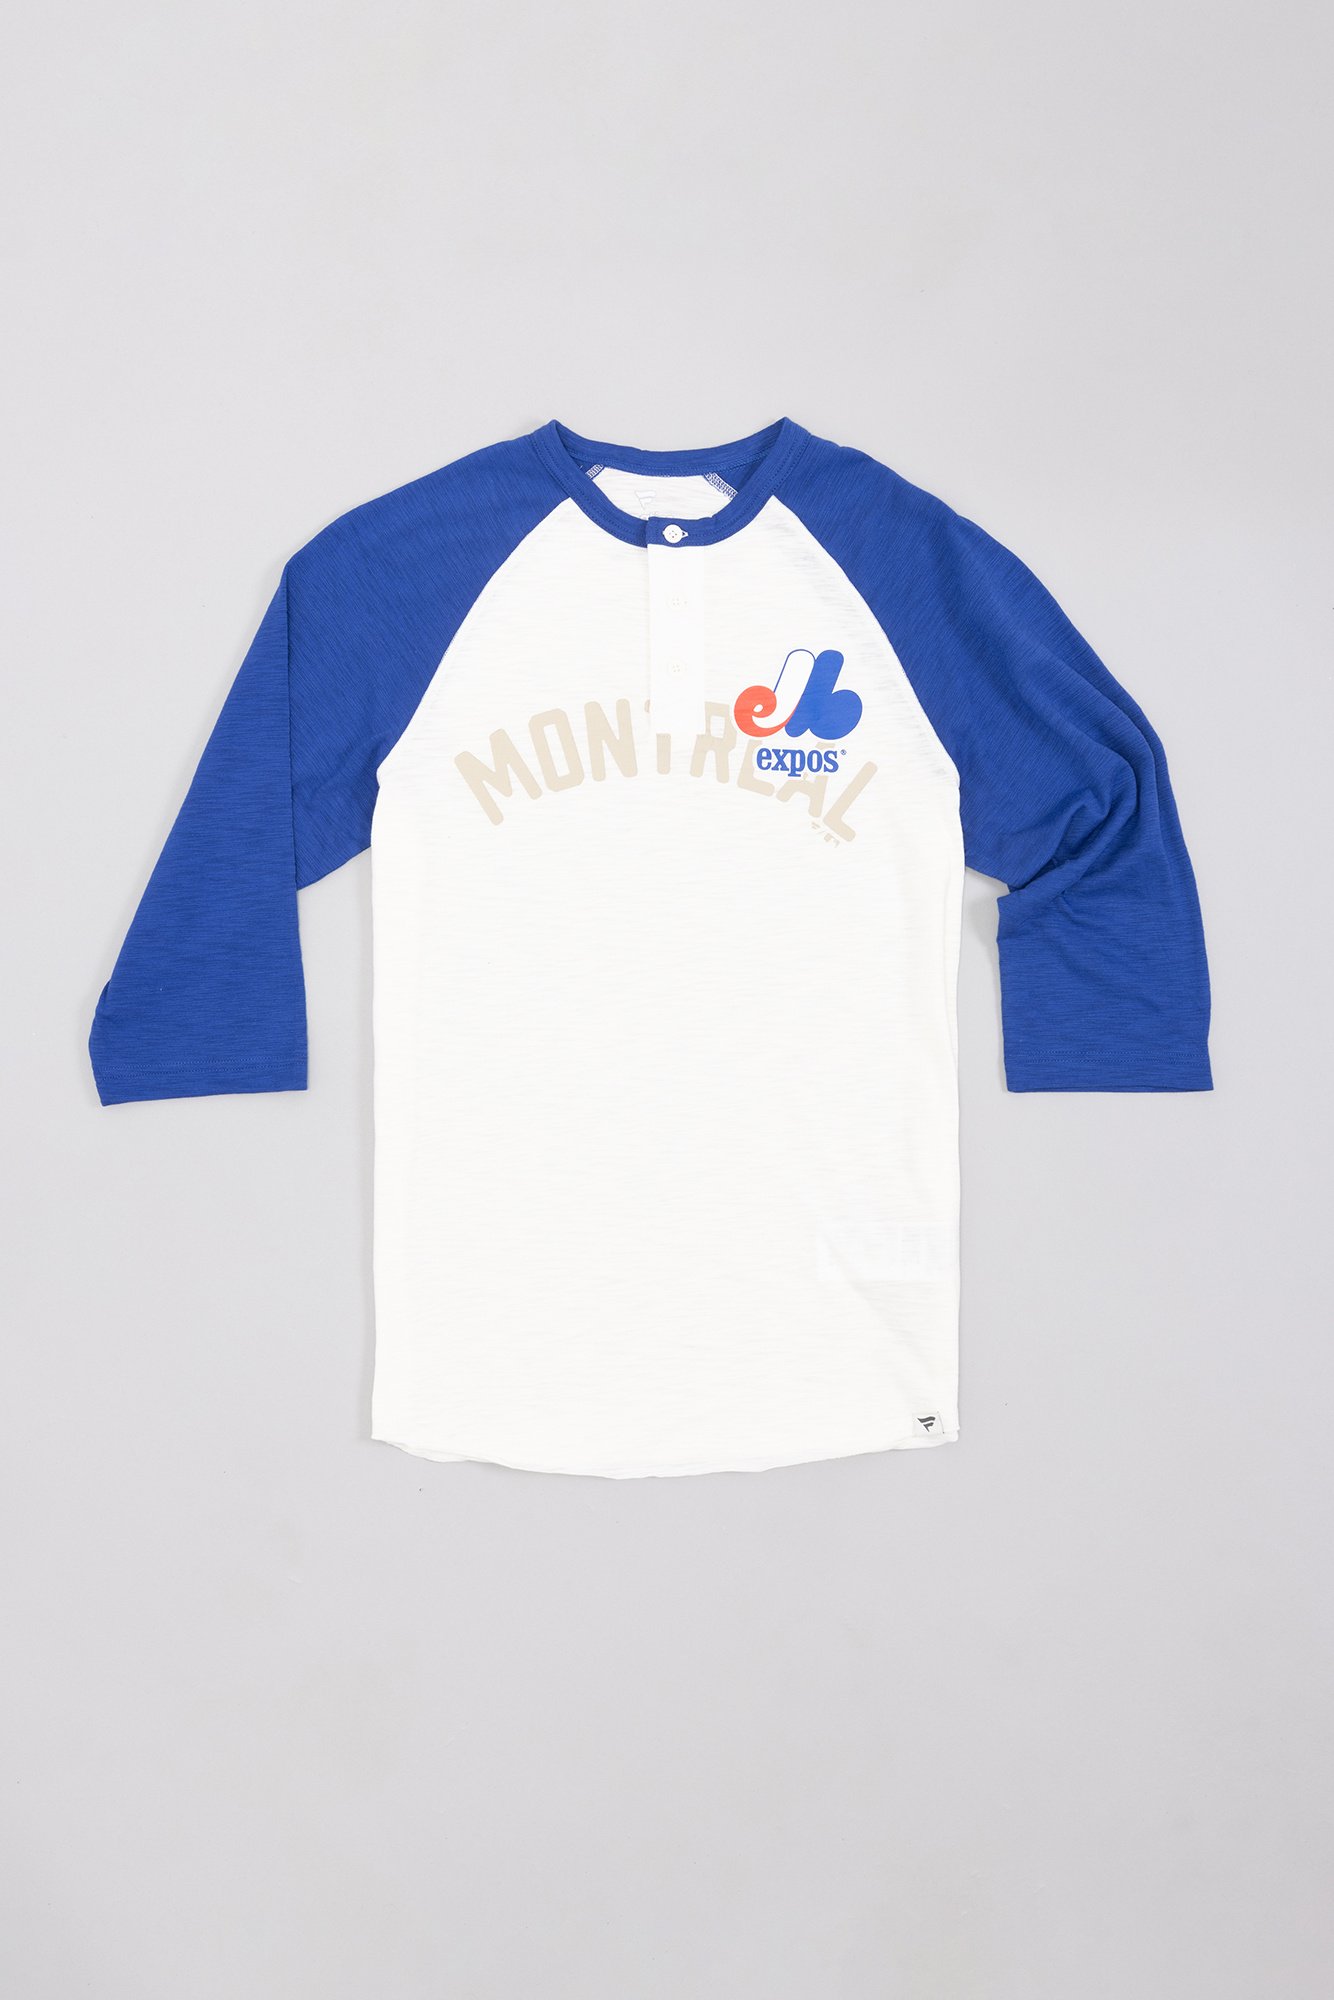 Montreal Expos Vintage Jersey - Tricolore Sports